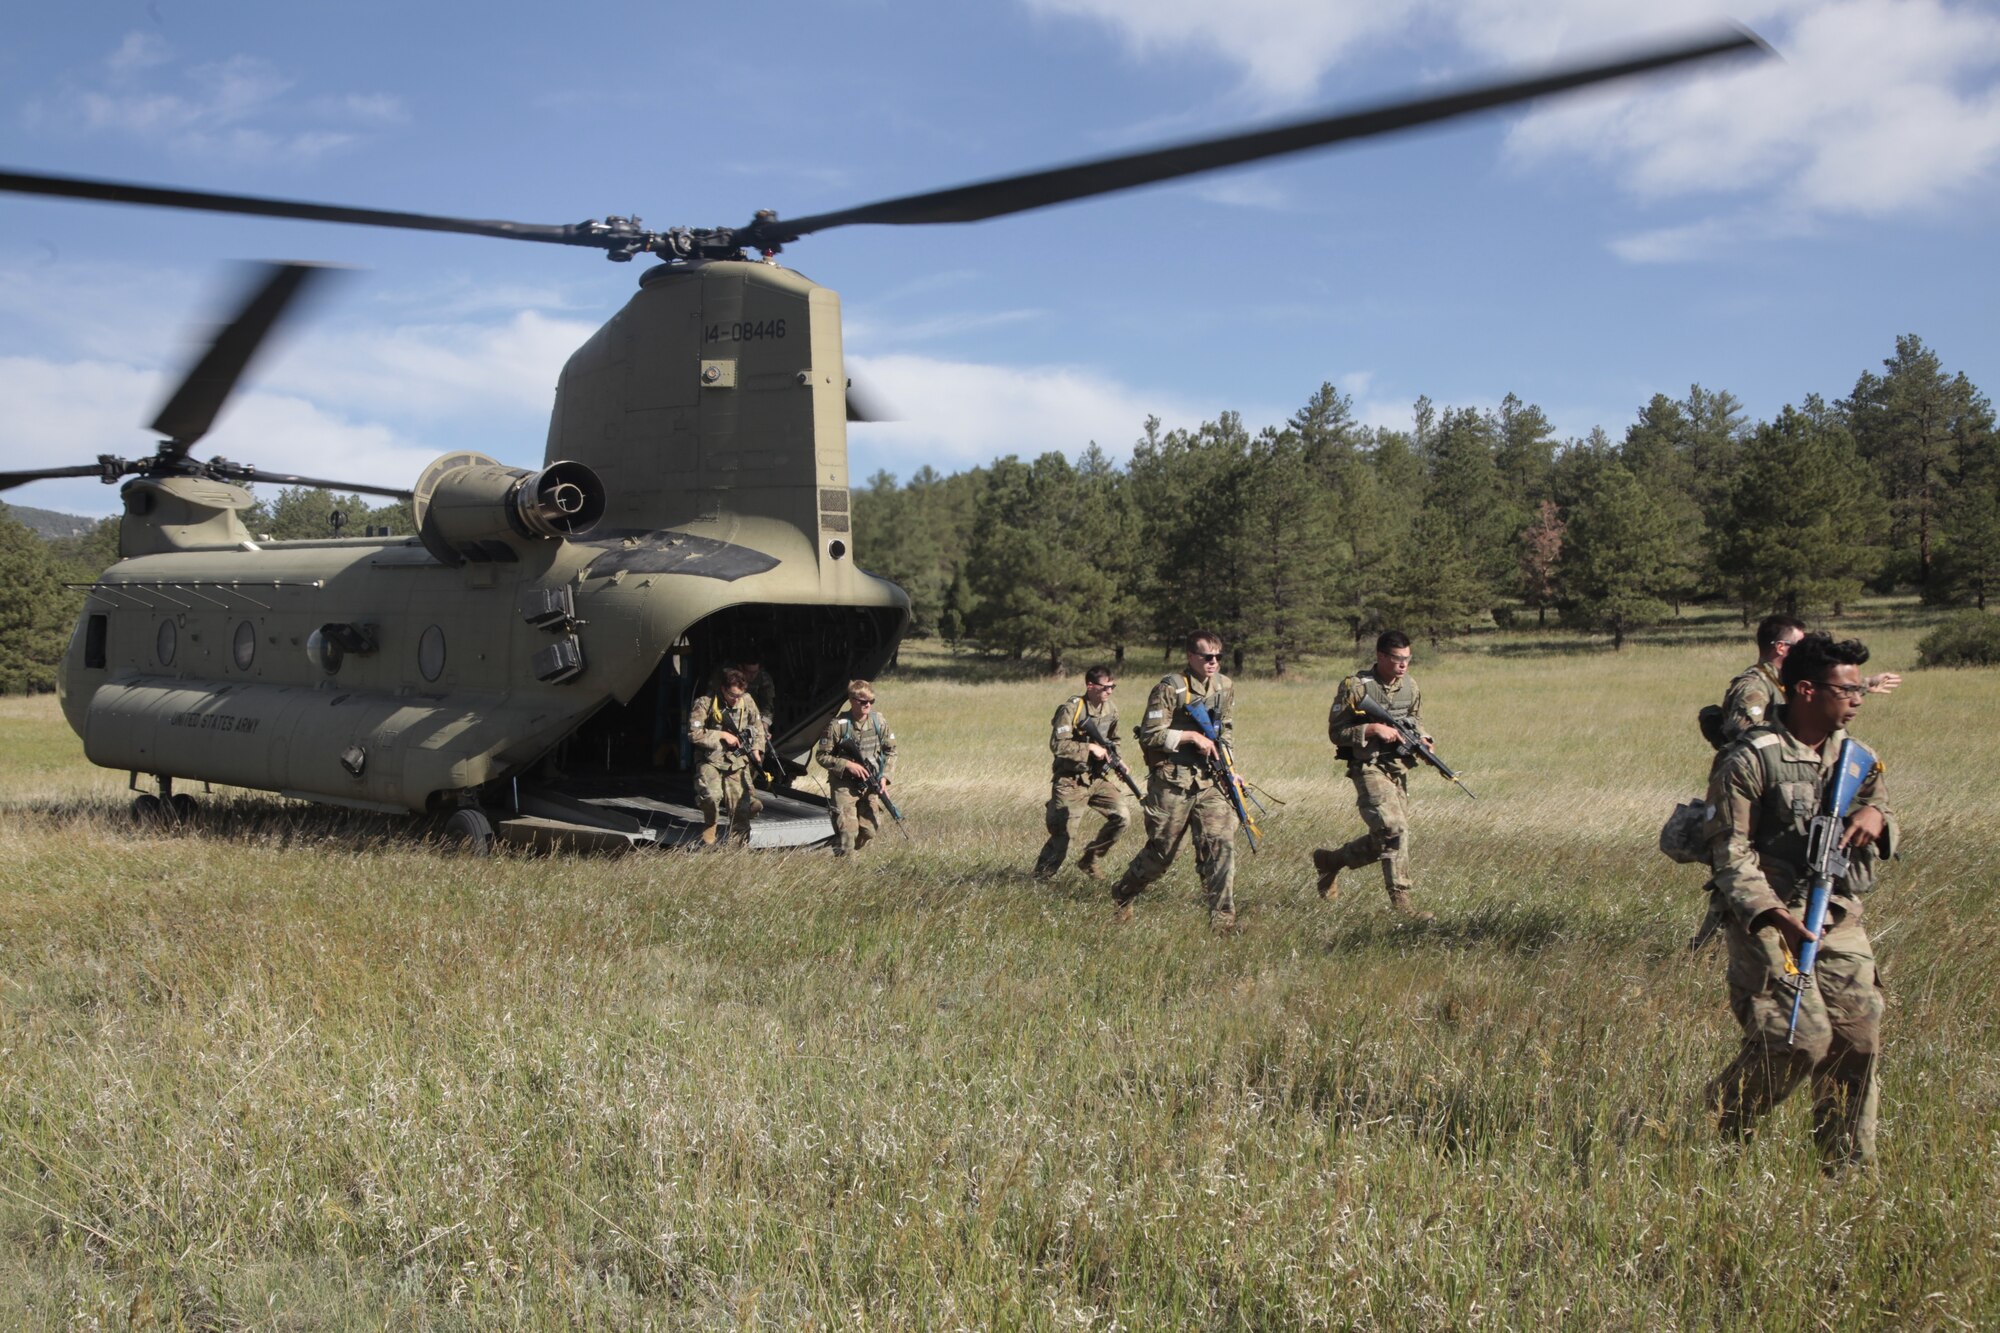 Cadets practice infiltration into an objective area from an Army CH-47 Chinook helicopter assigned to Bravo Company, 2nd General Support Aviation Battalion during the Special Warfare Orientation Course at the U.S. Air Force Academy, Colo., June 28, 2022. In addition to Fort Carson helicopter support, UH-1 Iroquois from the 54th Helicopter Squadron at Minot Air Force Base, N.D., and T-53 airplane trainers from the 306th Flying Training Group at the U.S. Air Force Academy supported the training program. (U.S. Air Force Academy courtesy photo)